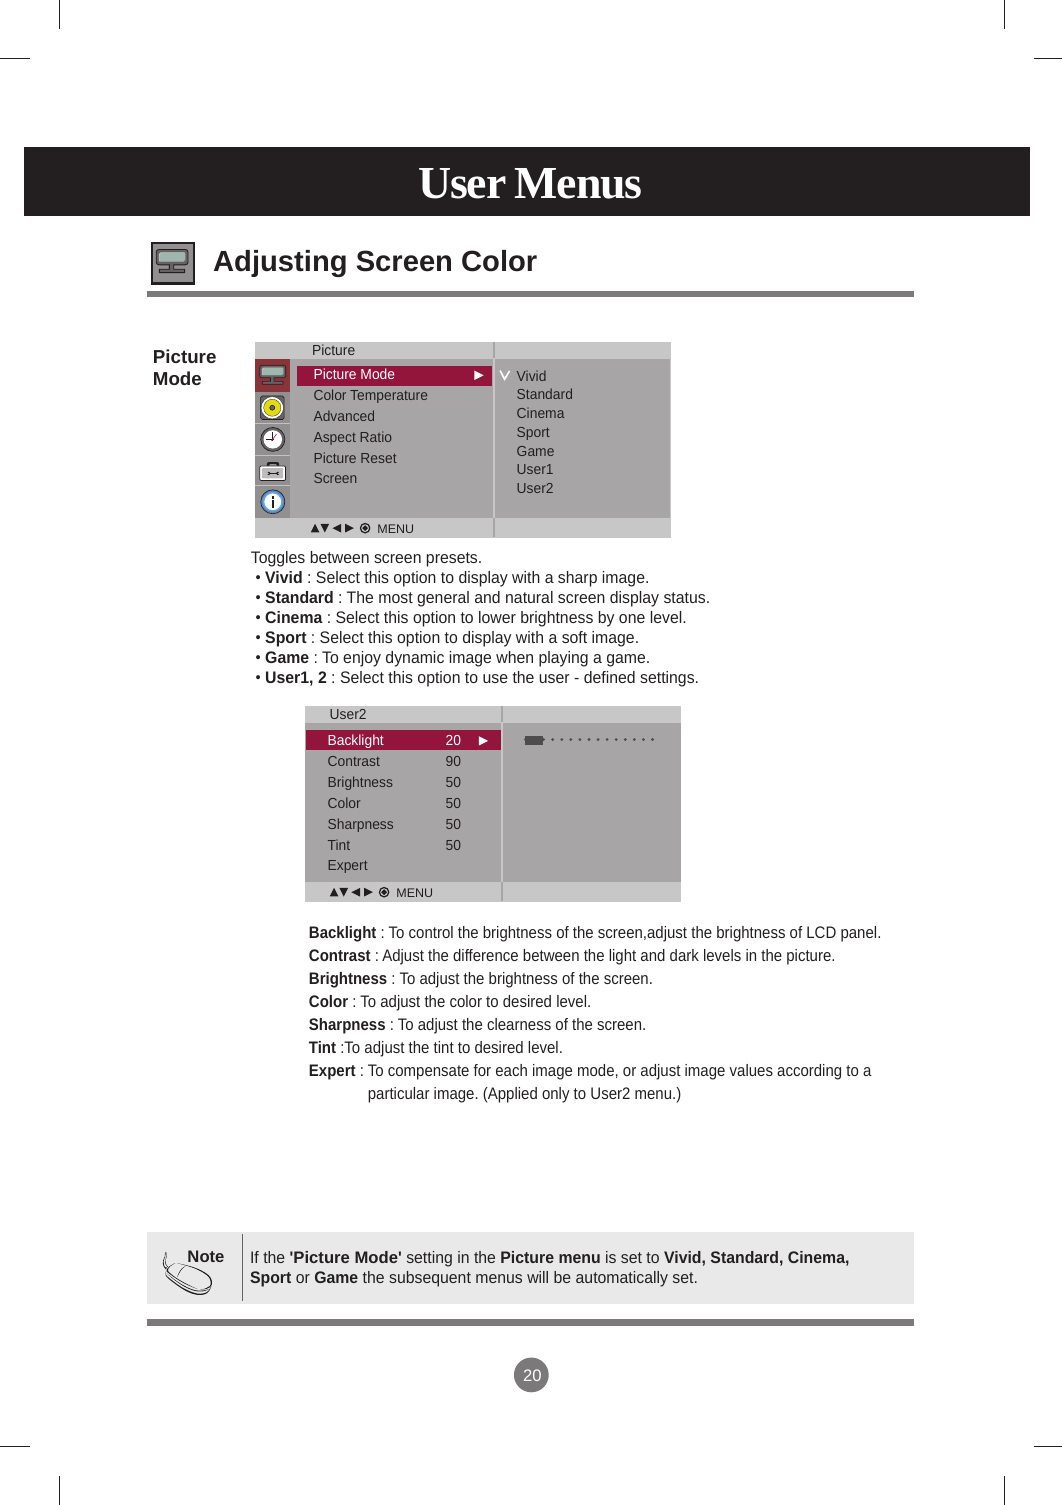 20User MenusAdjusting Screen ColorBacklight : To control the brightness of the screen,adjust the brightness of LCD panel.Contrast : Adjust the difference between the light and dark levels in the picture.Brightness : To adjust the brightness of the screen.Color : To adjust the color to desired level.Sharpness : To adjust the clearness of the screen.Tint :To adjust the tint to desired level.Expert :  To compensate for each image mode, or adjust image values according to a particular image. (Applied only to User2 menu.)Toggles between screen presets. • Vivid : Select this option to display with a sharp image.  • Standard : The most general and natural screen display status. • Cinema : Select this option to lower brightness by one level.  • Sport : Select this option to display with a soft image. • Game : To enjoy dynamic image when playing a game.  • User1, 2 : Select this option to use the user - defined settings.PictureModeNoteIf the &apos;Picture Mode&apos; setting in the Picture menu is set to Vivid, Standard, Cinema, Sport or Game the subsequent menus will be automatically set.PicturePicture ModeColor TemperatureAdvancedAspect RatioPicture ResetScreenVividStandardCinemaSportGameUser1User2User2Backlight  20Contrast  90Brightness  50Color  50Sharpness  50Tint  50Expert MENUMENU